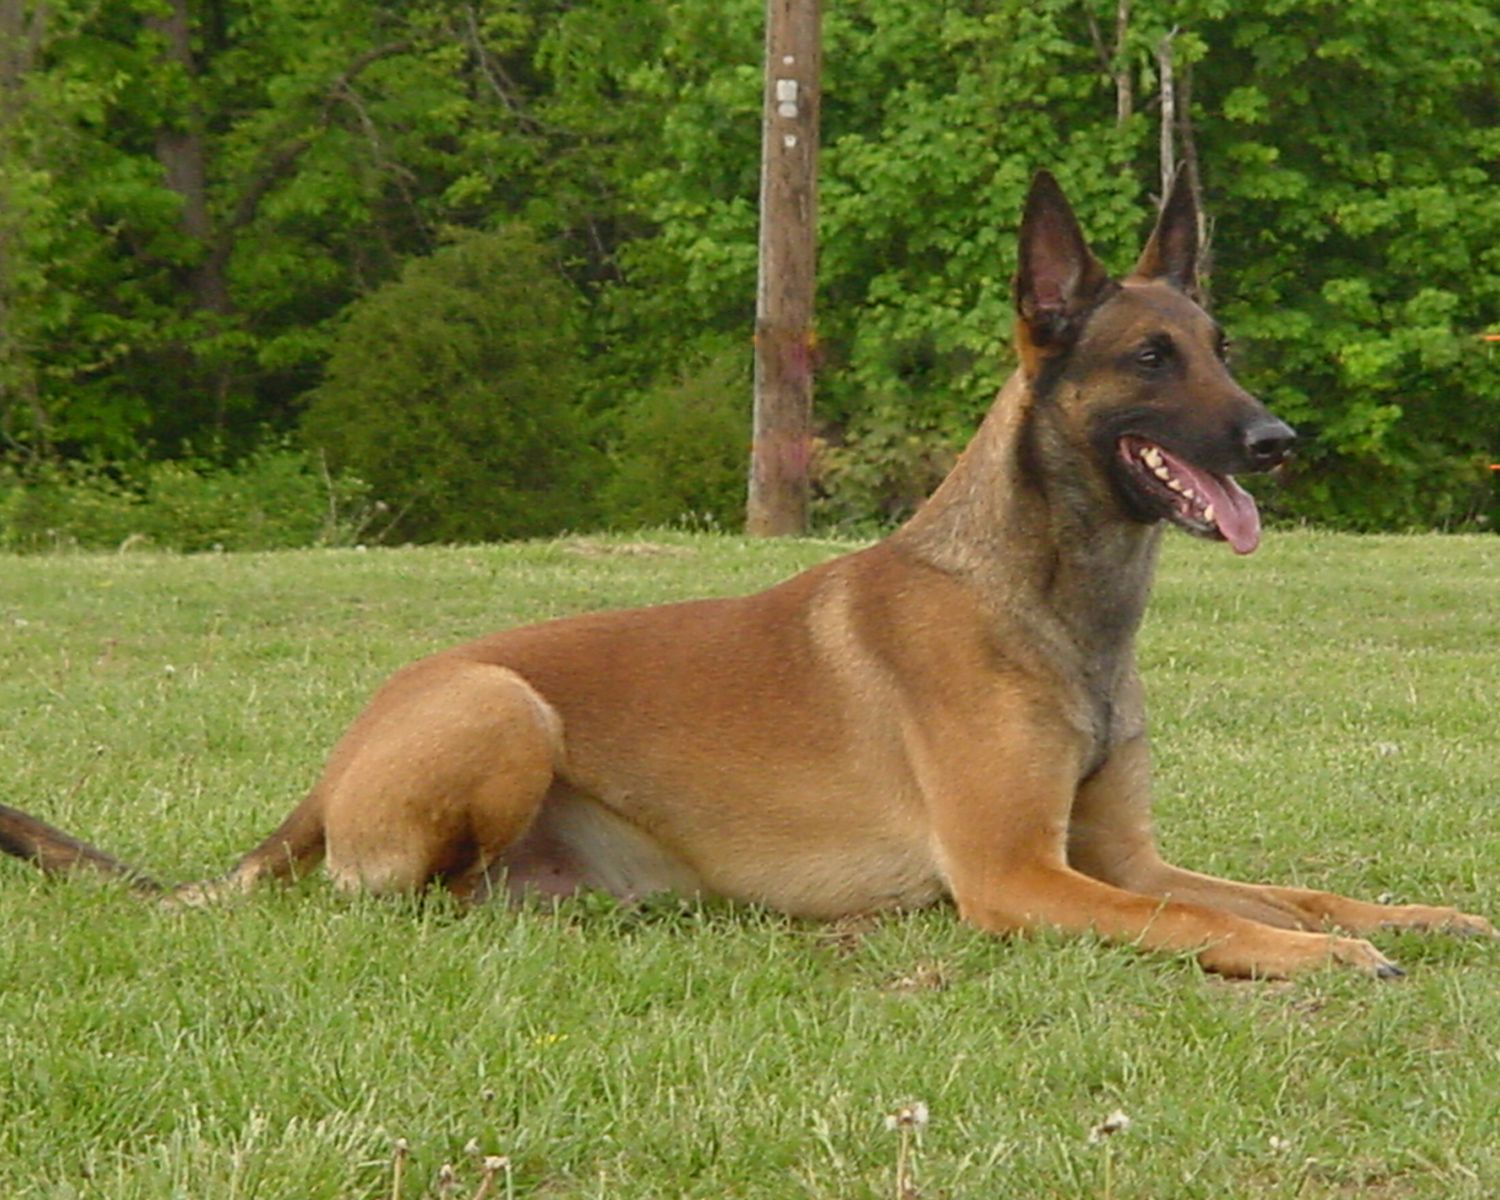 Belgian Malinois dogs - Pets Cute and Docile